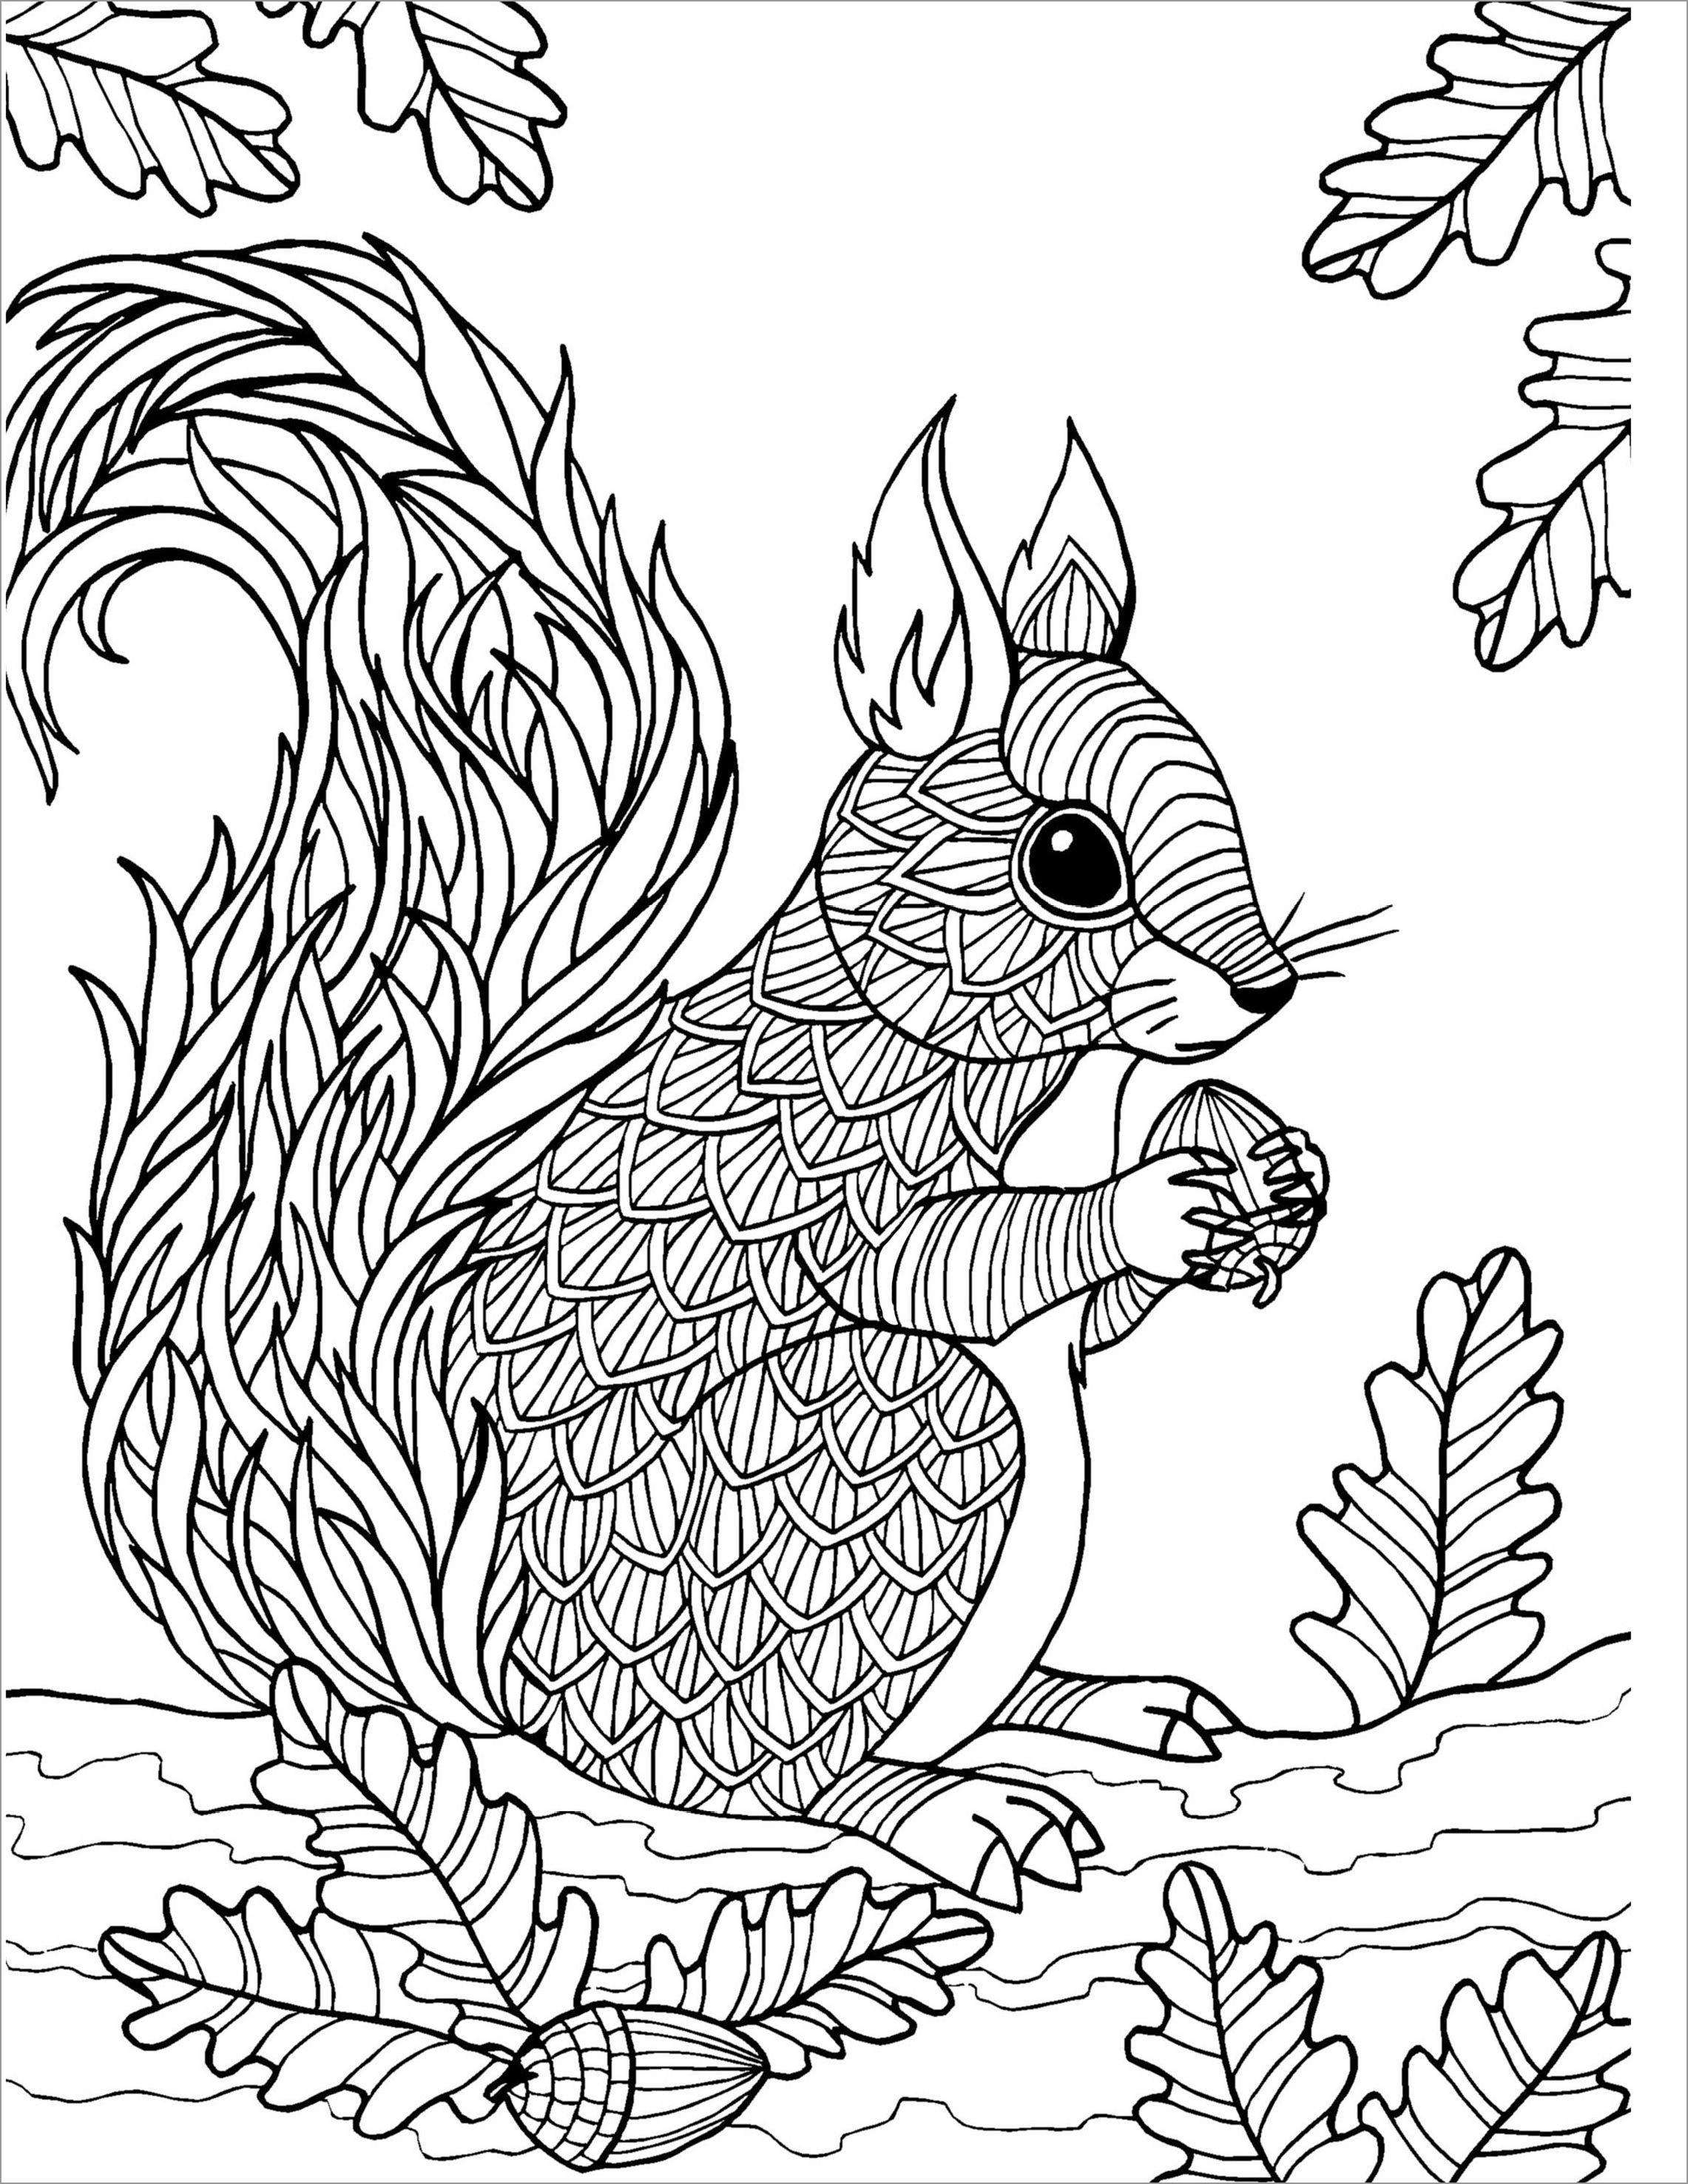 Zentangle Squirrel Coloring Page for Adult